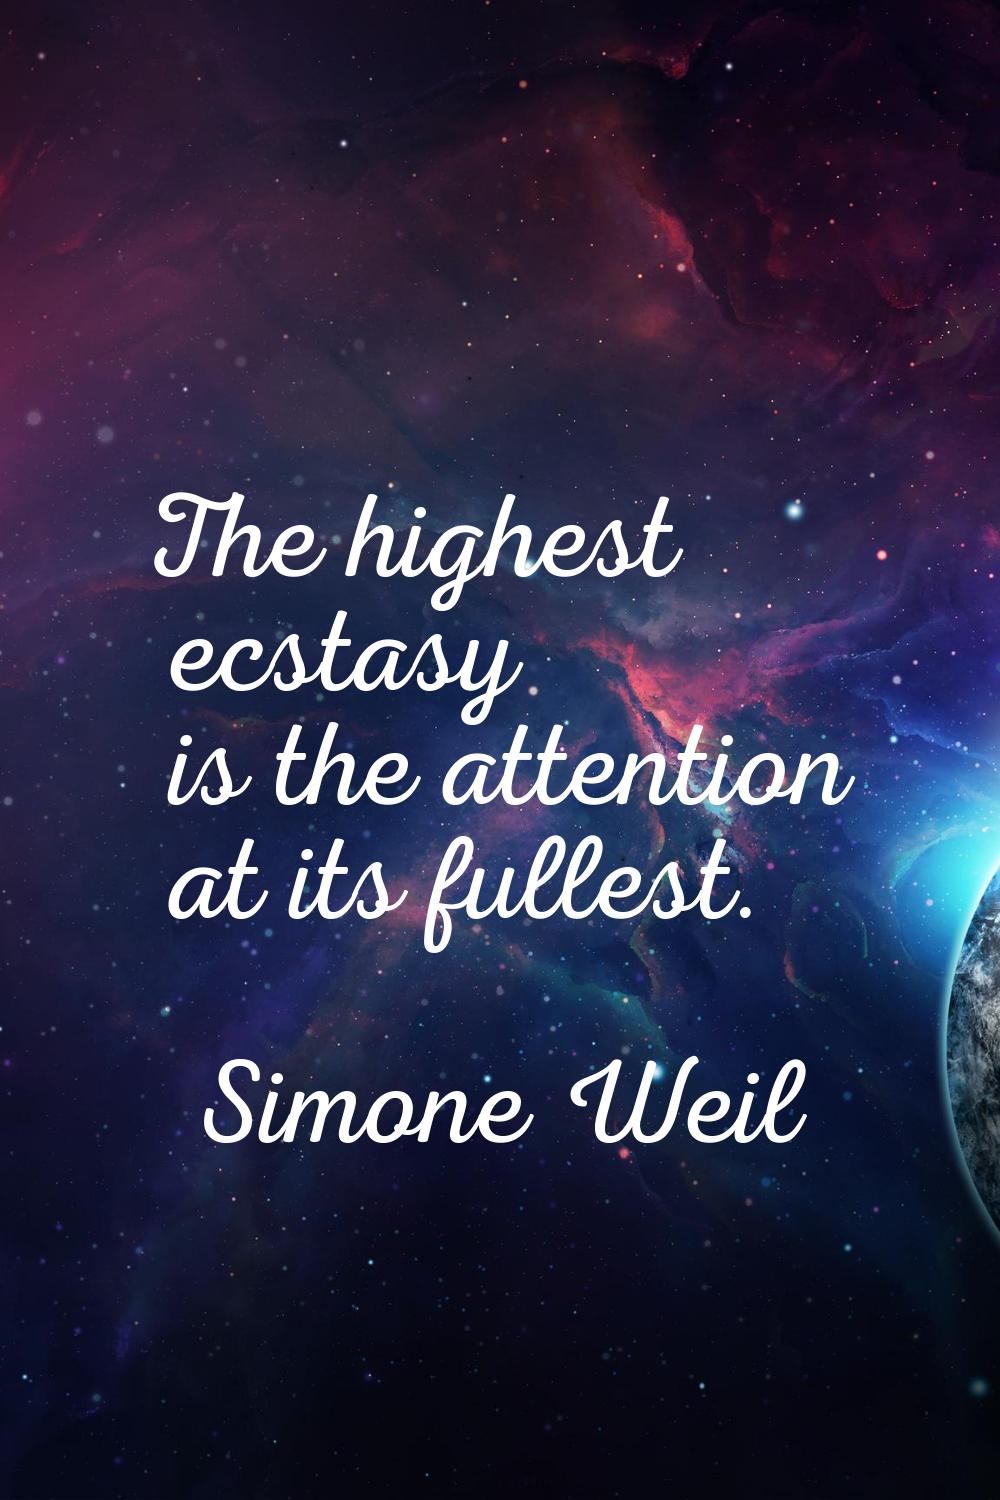 The highest ecstasy is the attention at its fullest.